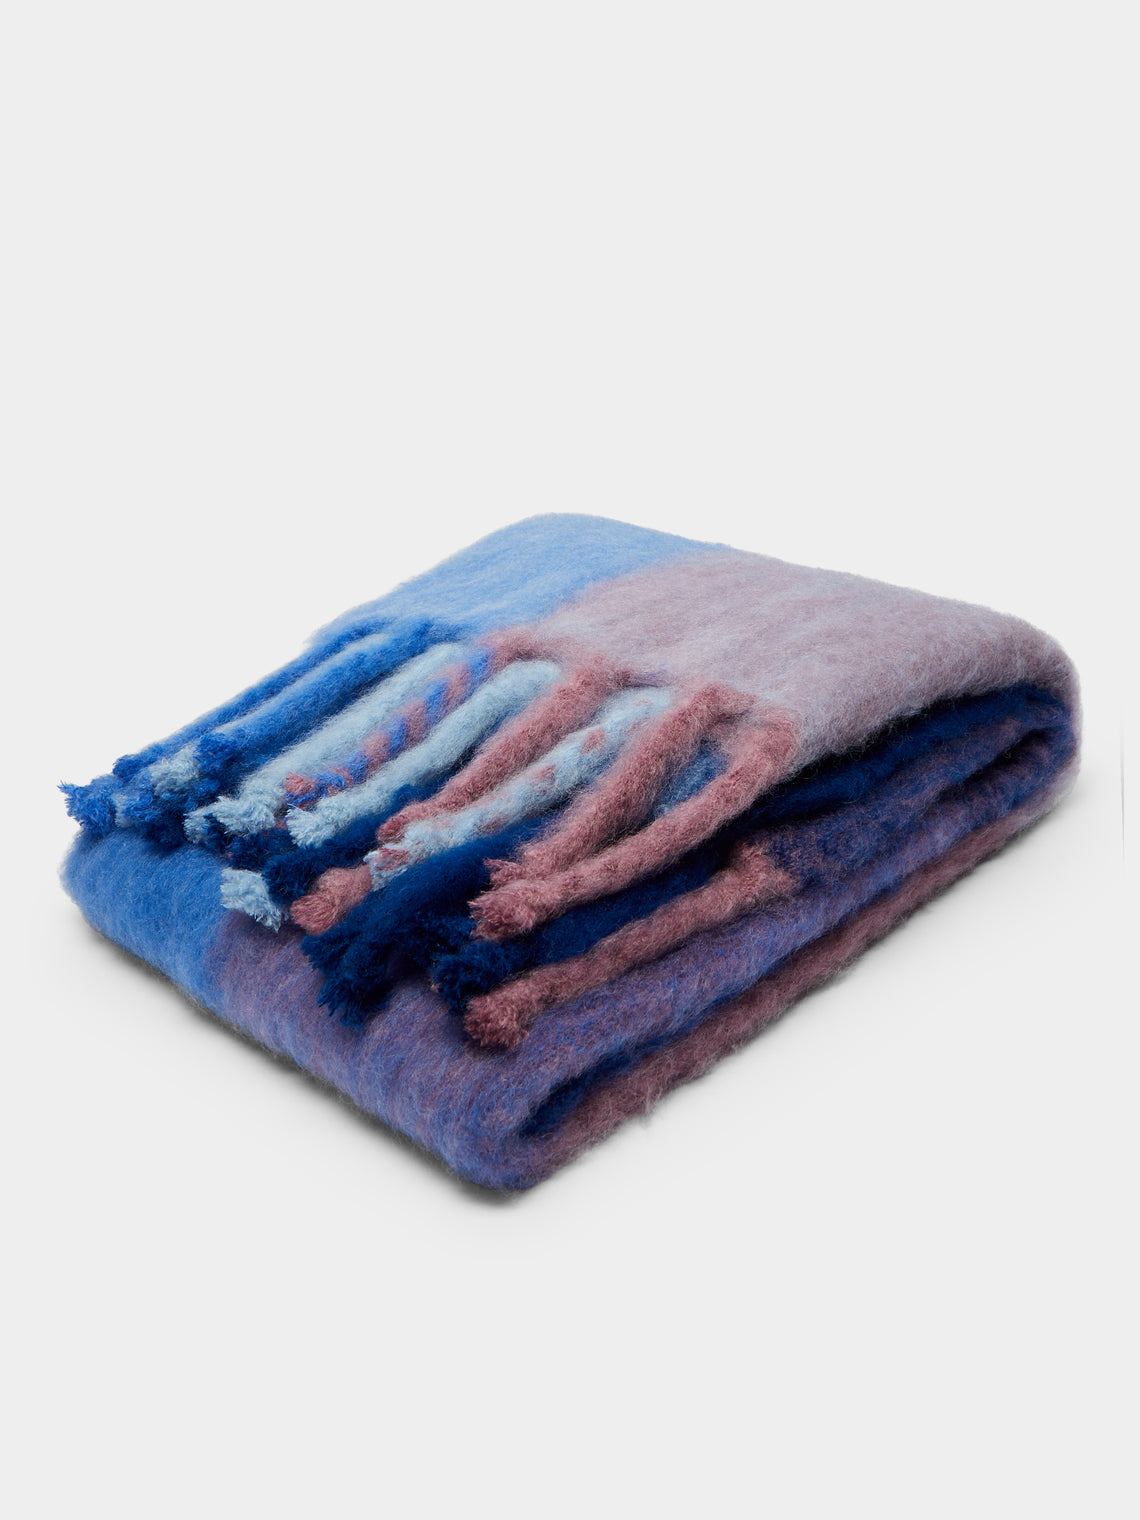 Lena Rewell - Coral Handwoven Mohair Blanket -  - ABASK